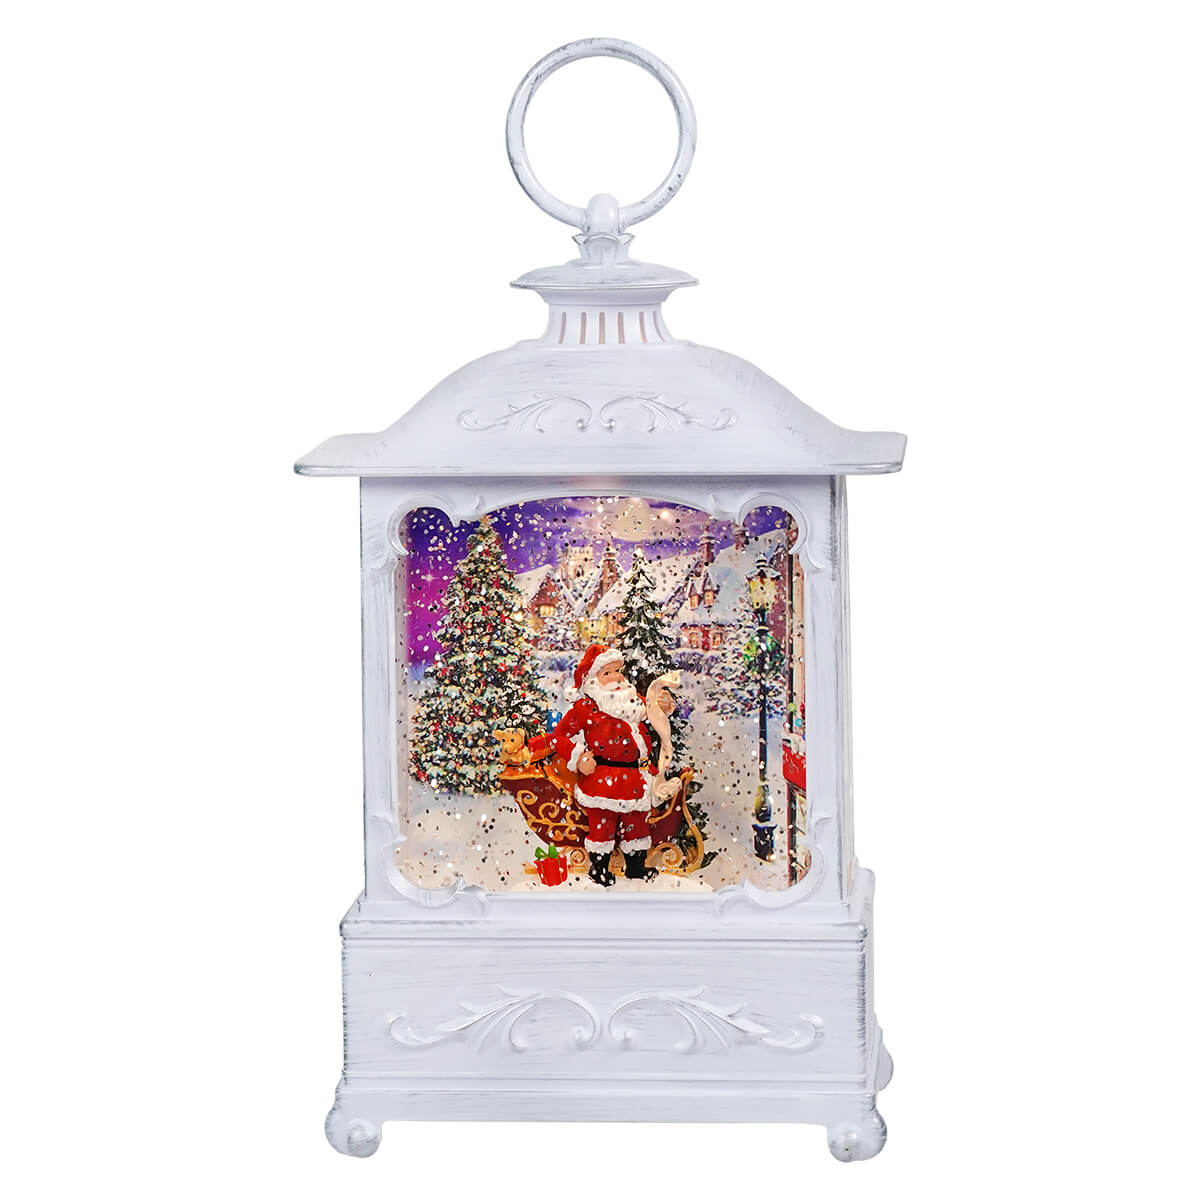 Lighted Spinning Water Globe Lantern With Santa Checking His List